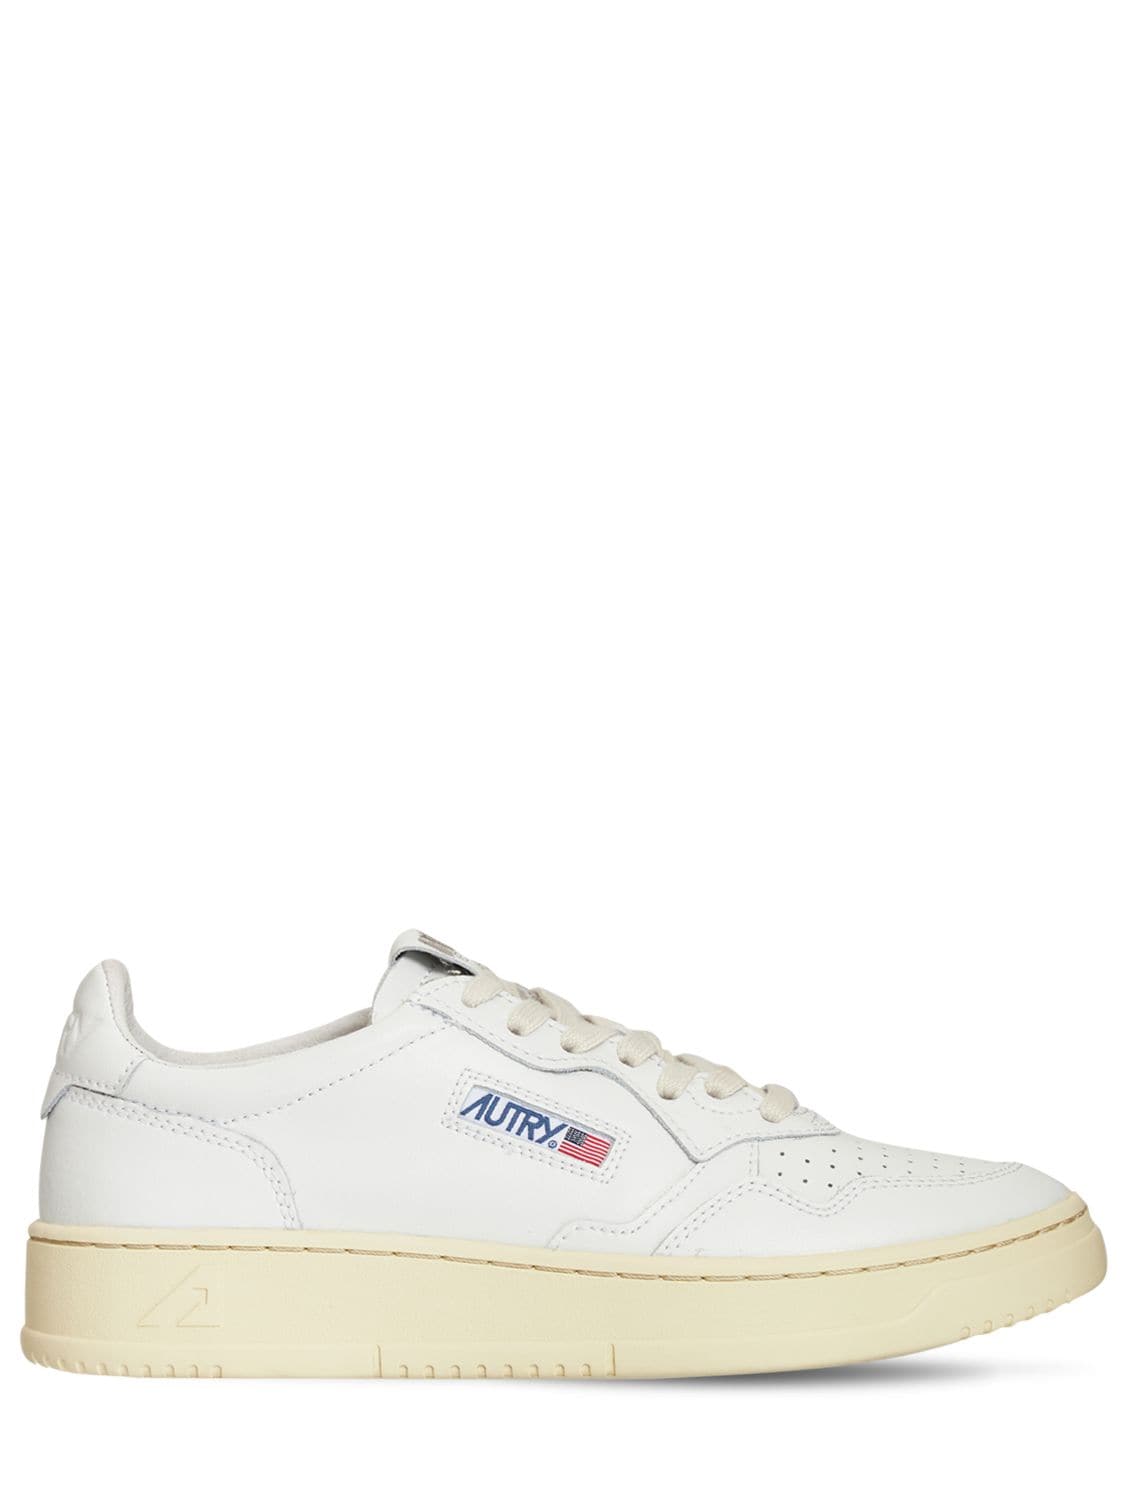 Autry Medalist Low Sneakers In White | ModeSens